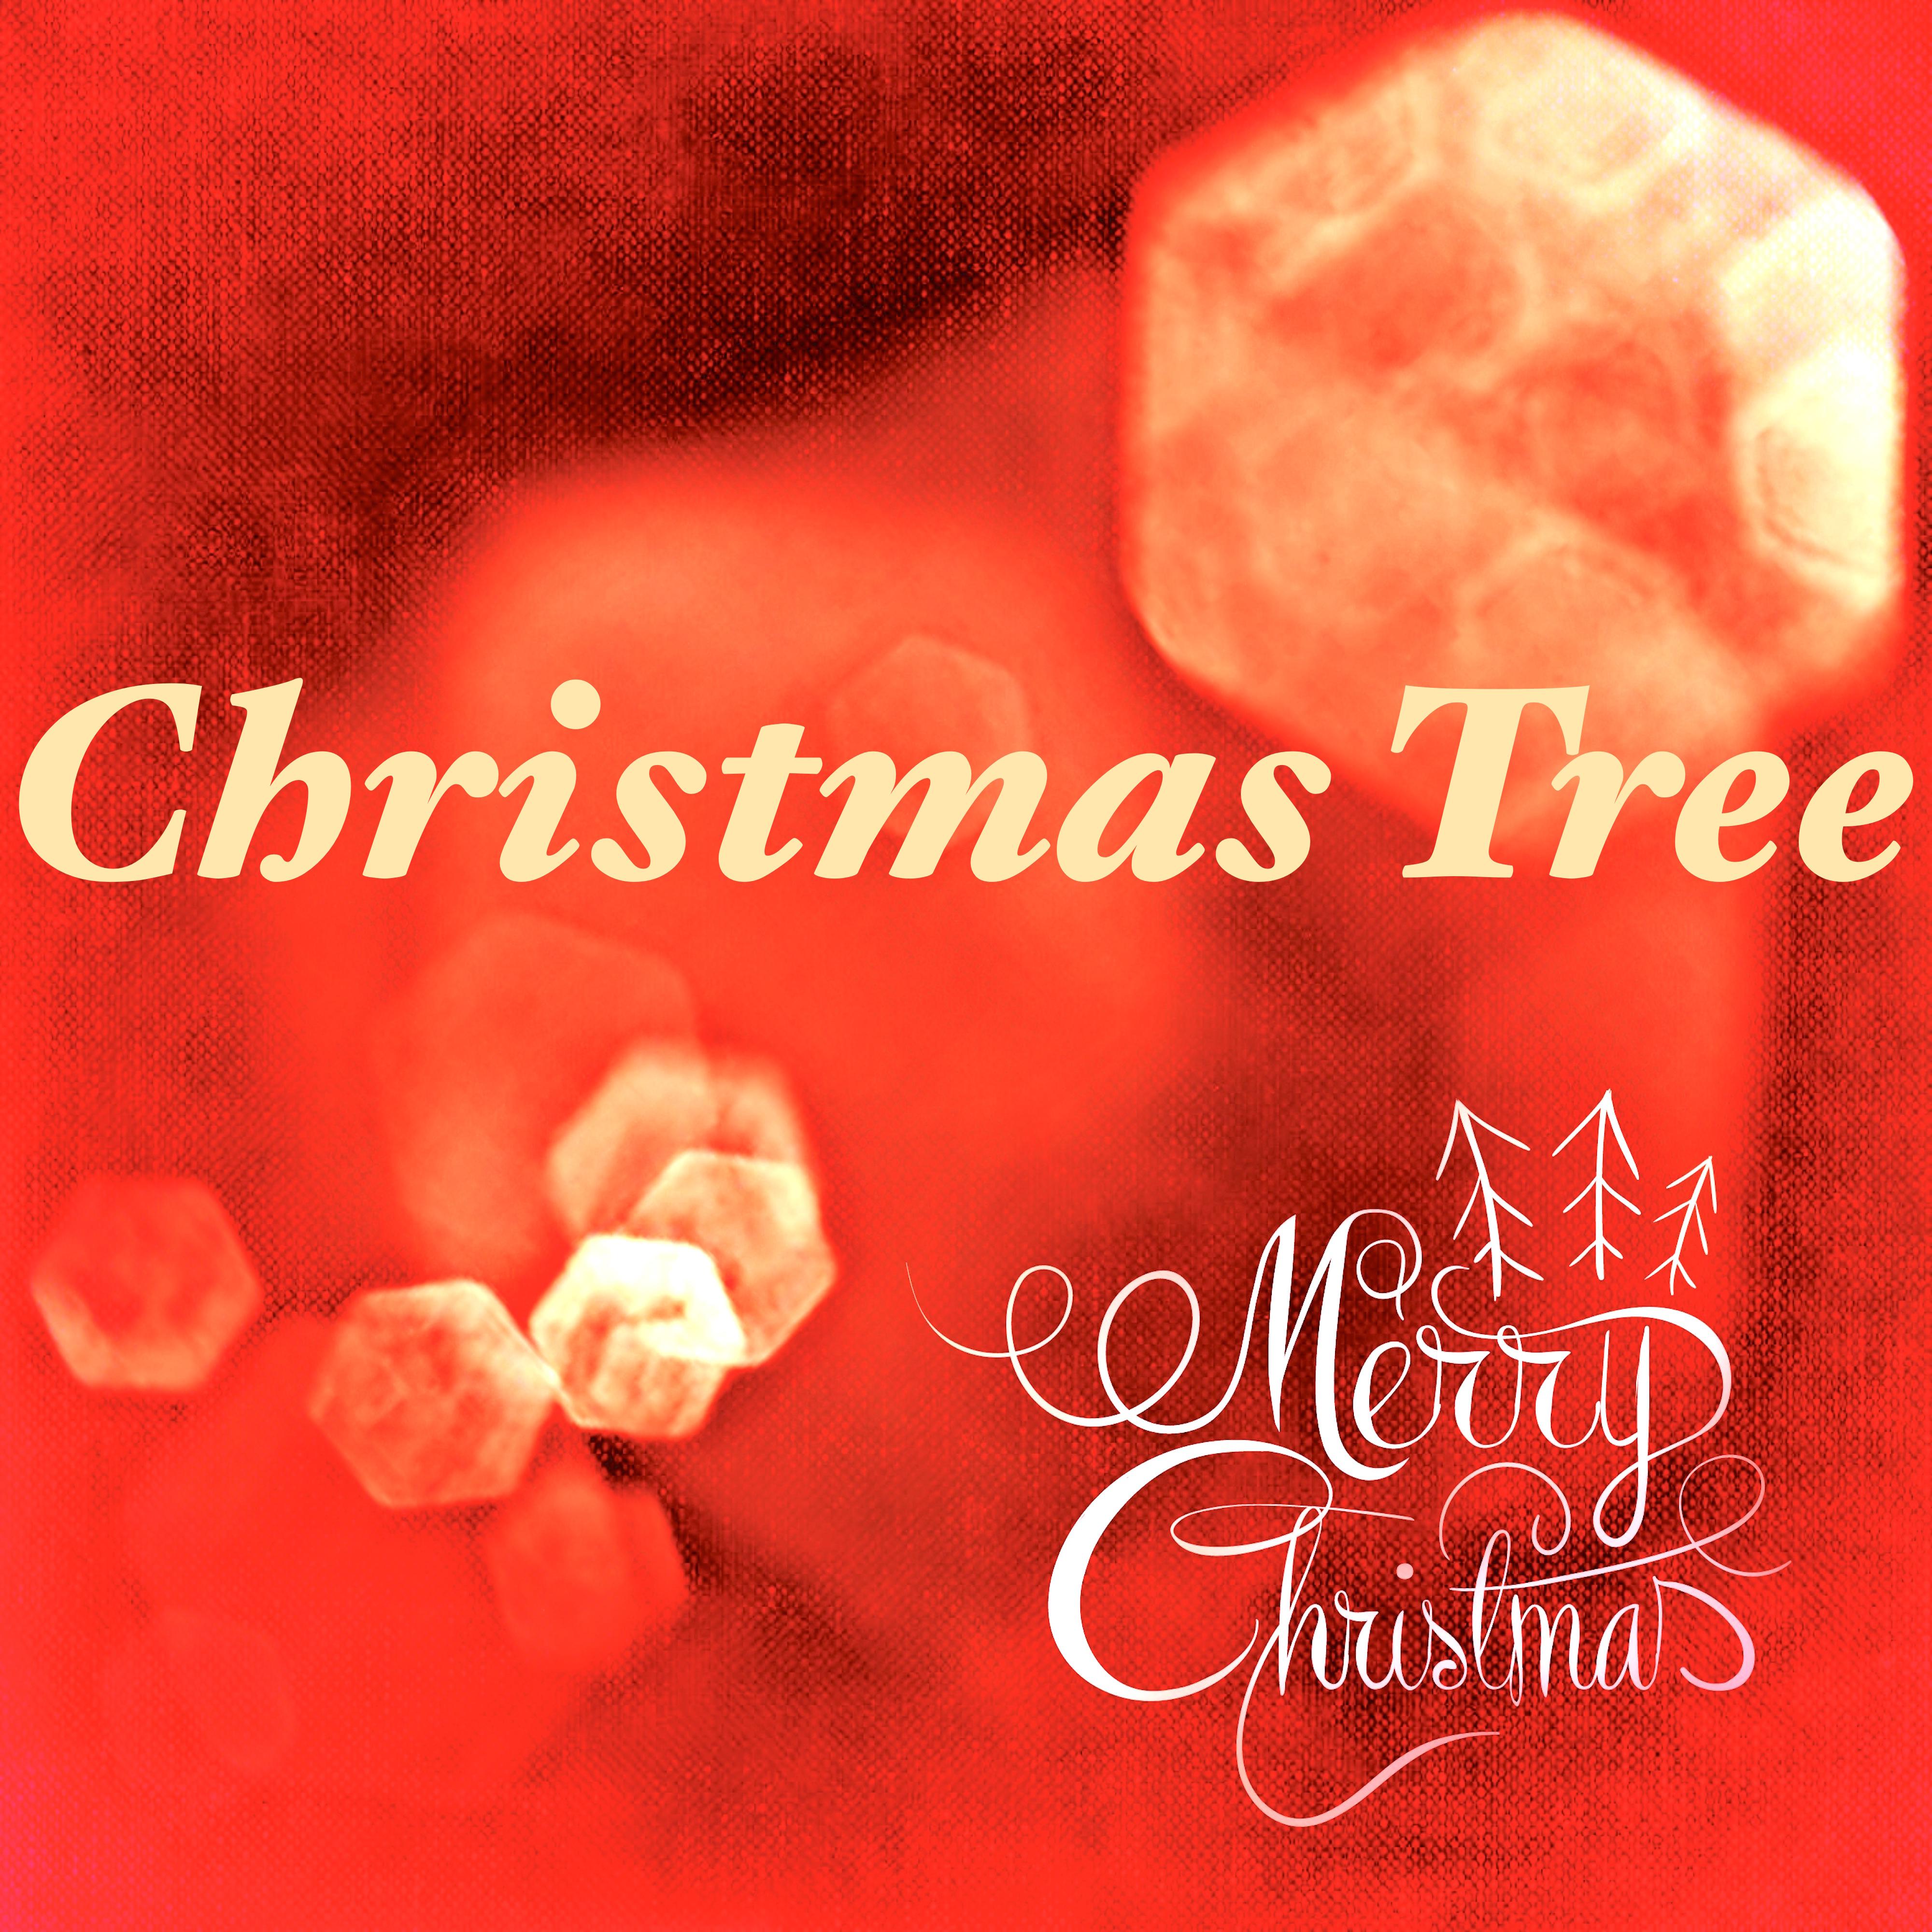 Christmas Tree: Kids Christmas Songs, Happy New Year's Day Music & Christmas Album for Original Gift - Santa is Coming but All I Want for Christmas is You